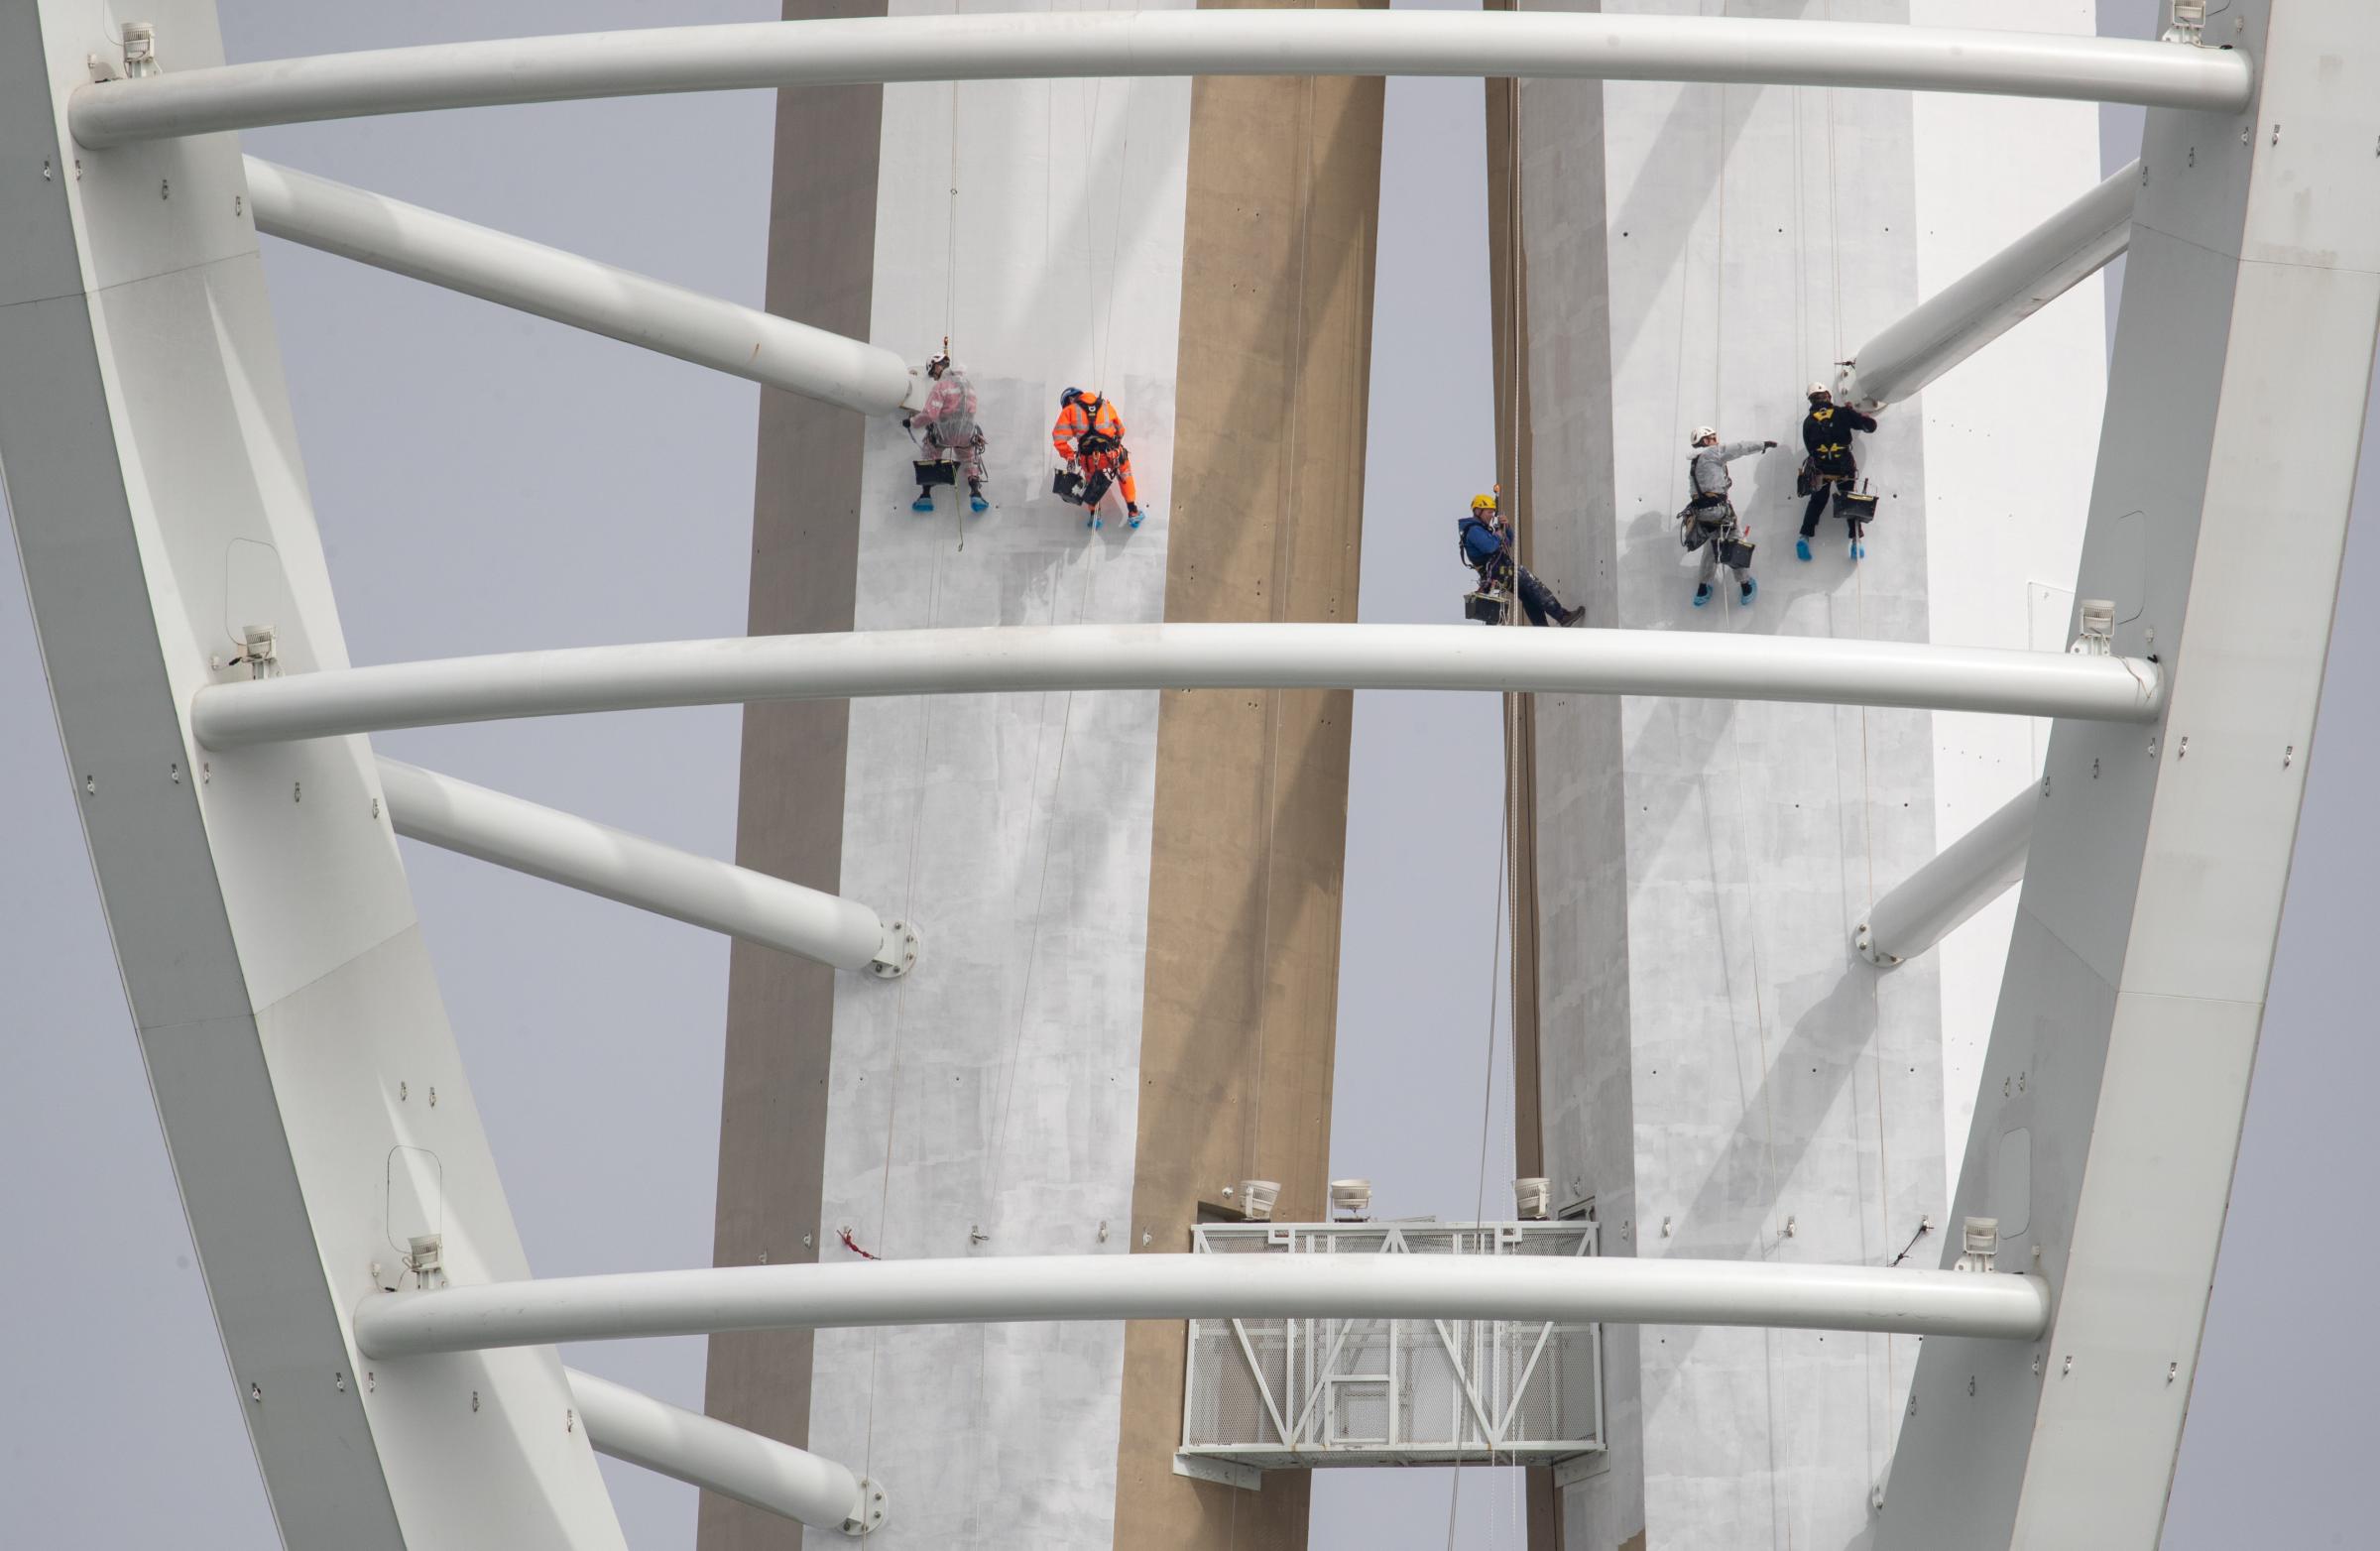 Contractors paint the outside of the Spinnaker Tower in Portsmouth harbour, which is being repainted its original white after the branding arrangement with Emirates ended on June 30, 2020 Picture: ANDREW MATTHEWS/PA